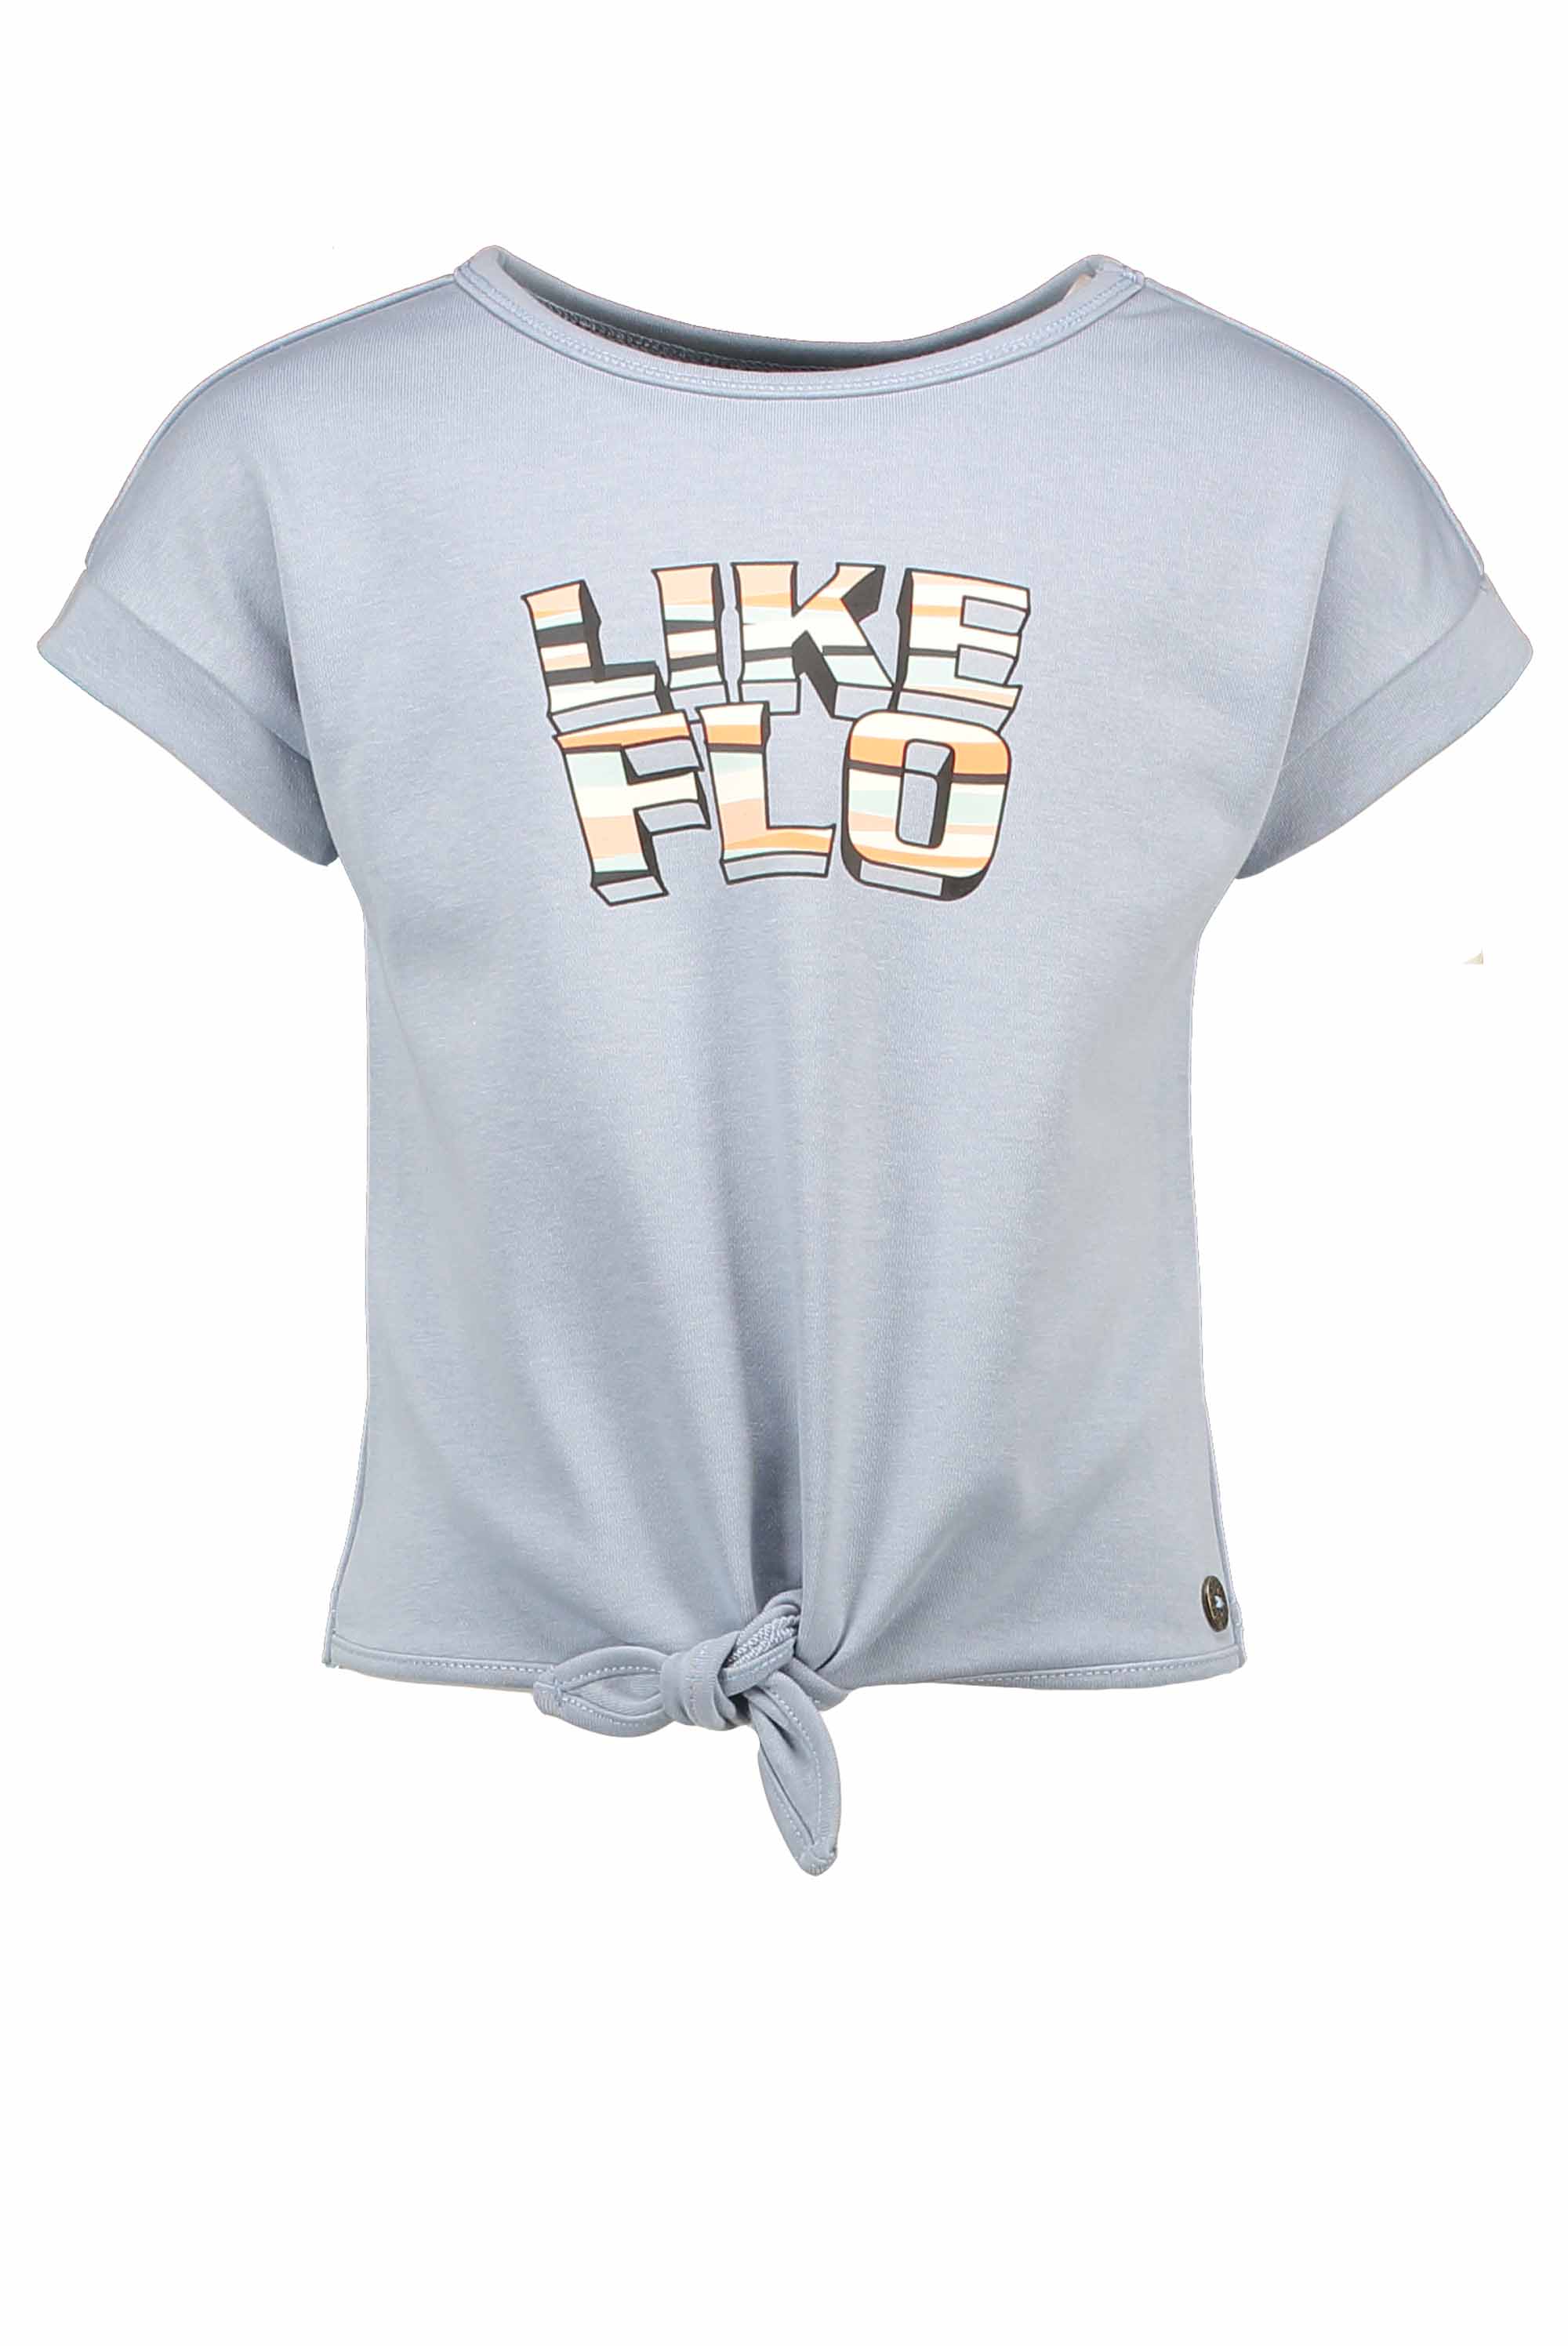 Like Flo girls knotted sweat top